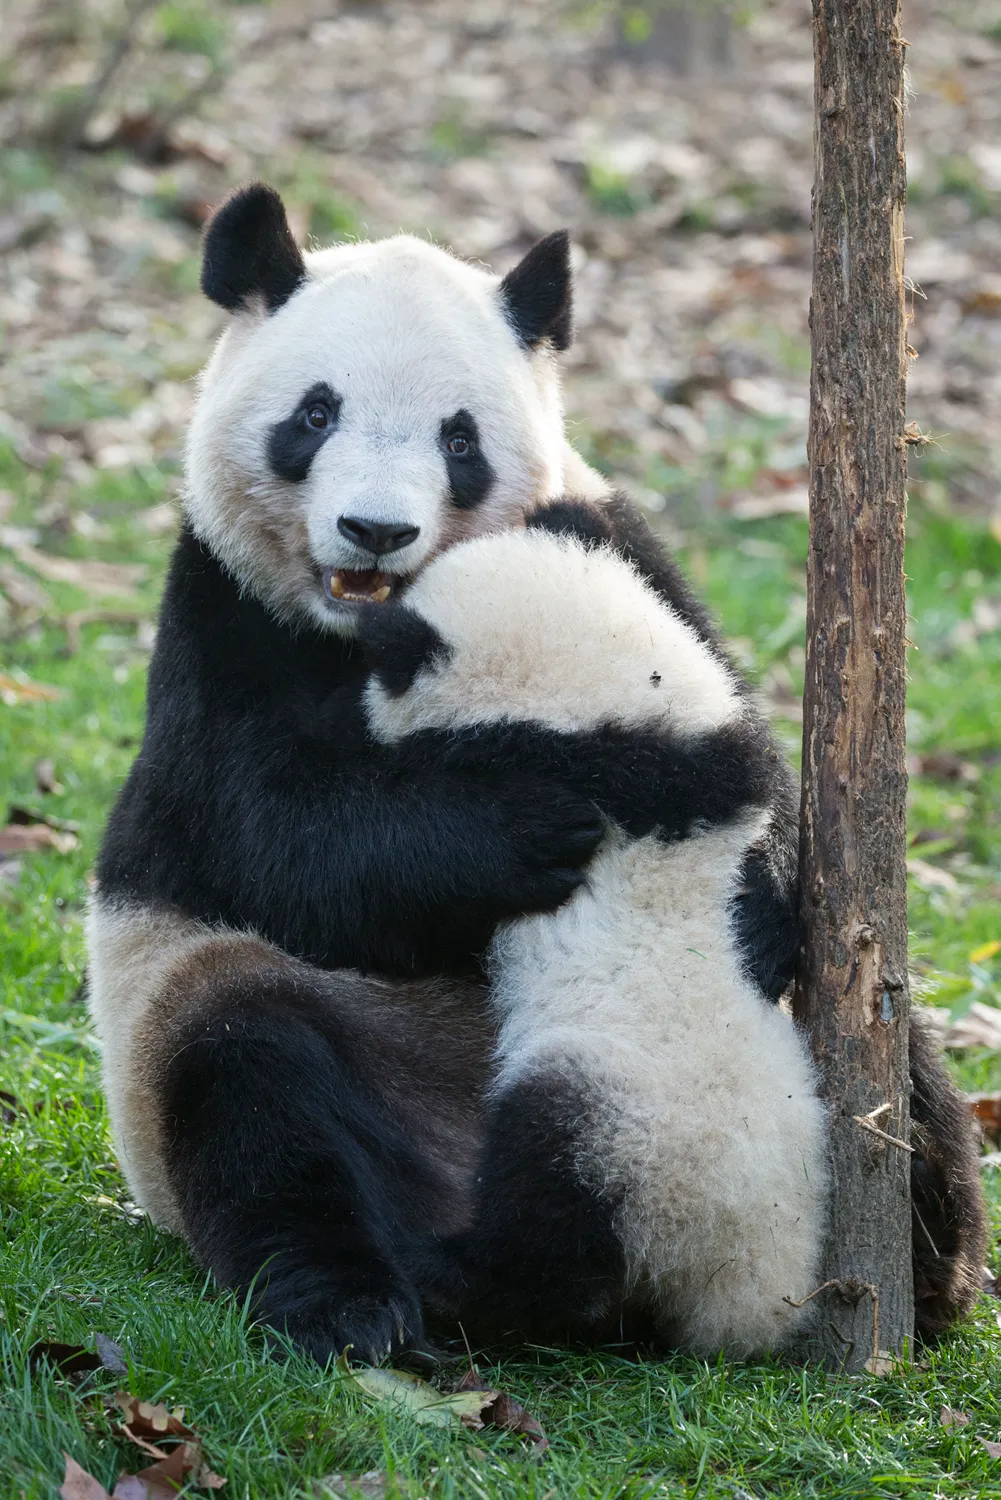 A panda cub will remain with its mother for two to three years before becoming independent. © Suzi Eszterhas